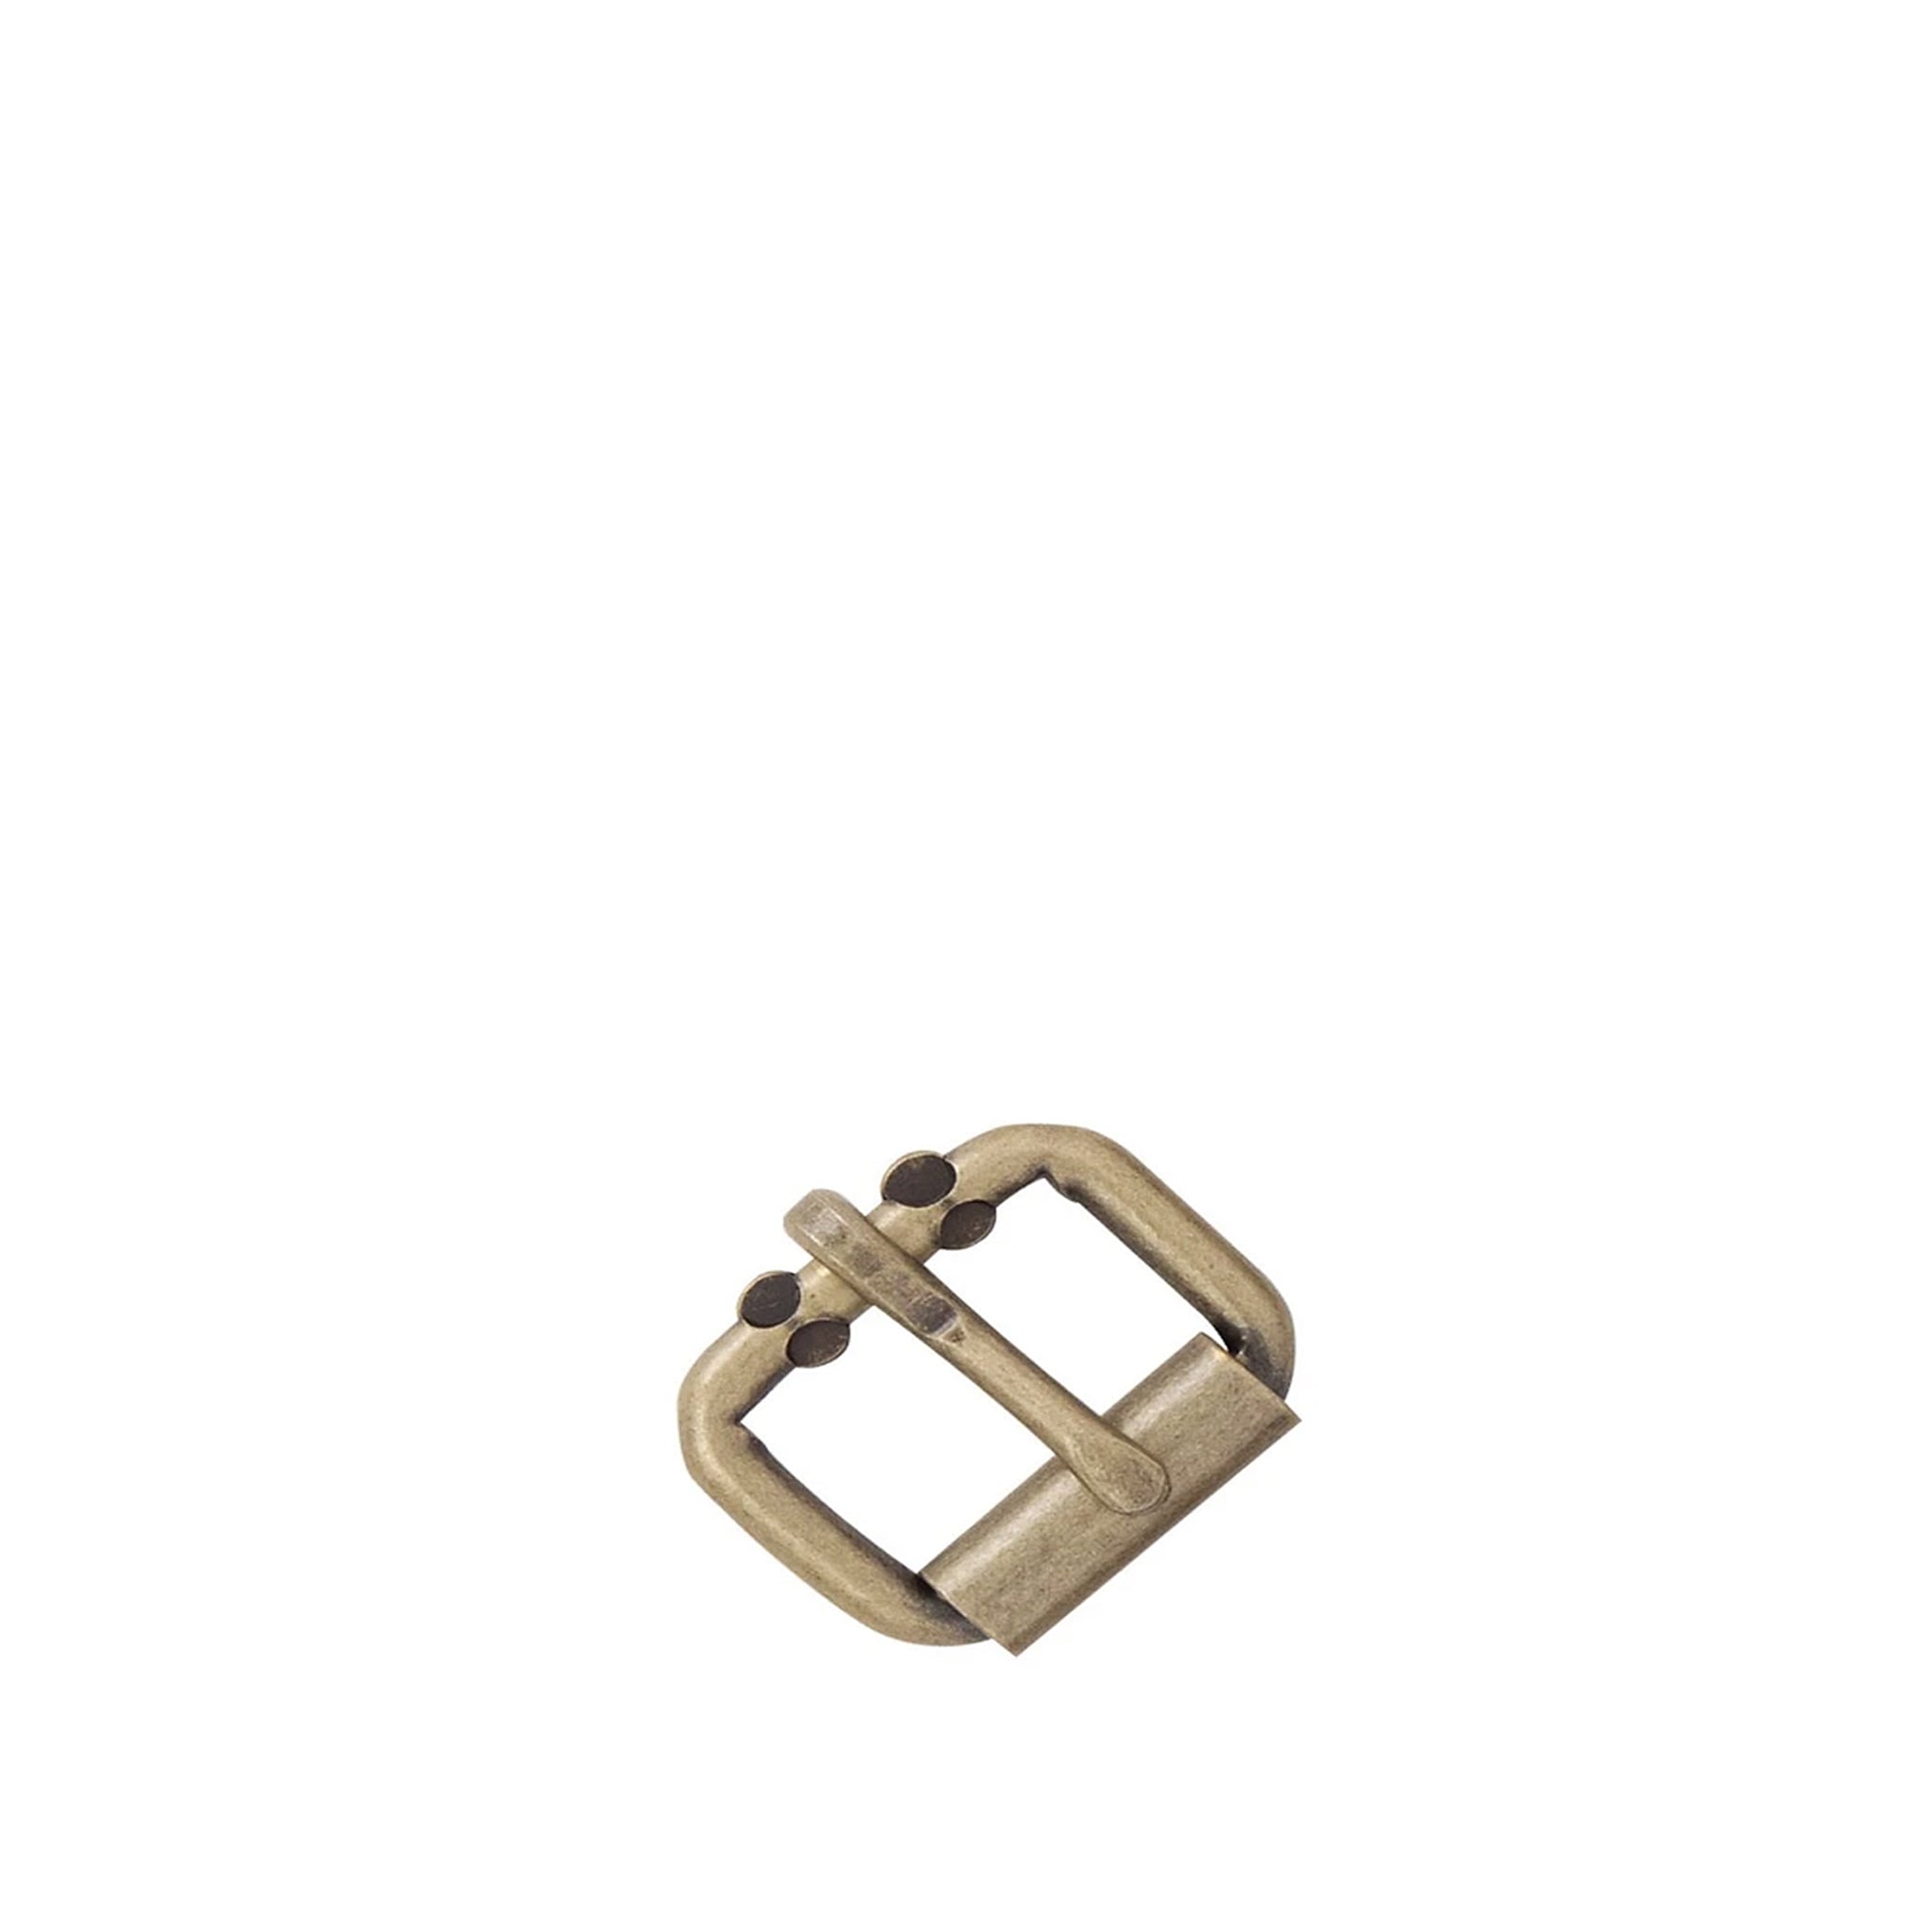 44mm Single Prong Roller Buckle - Antique Brass from Identity Leathercraft